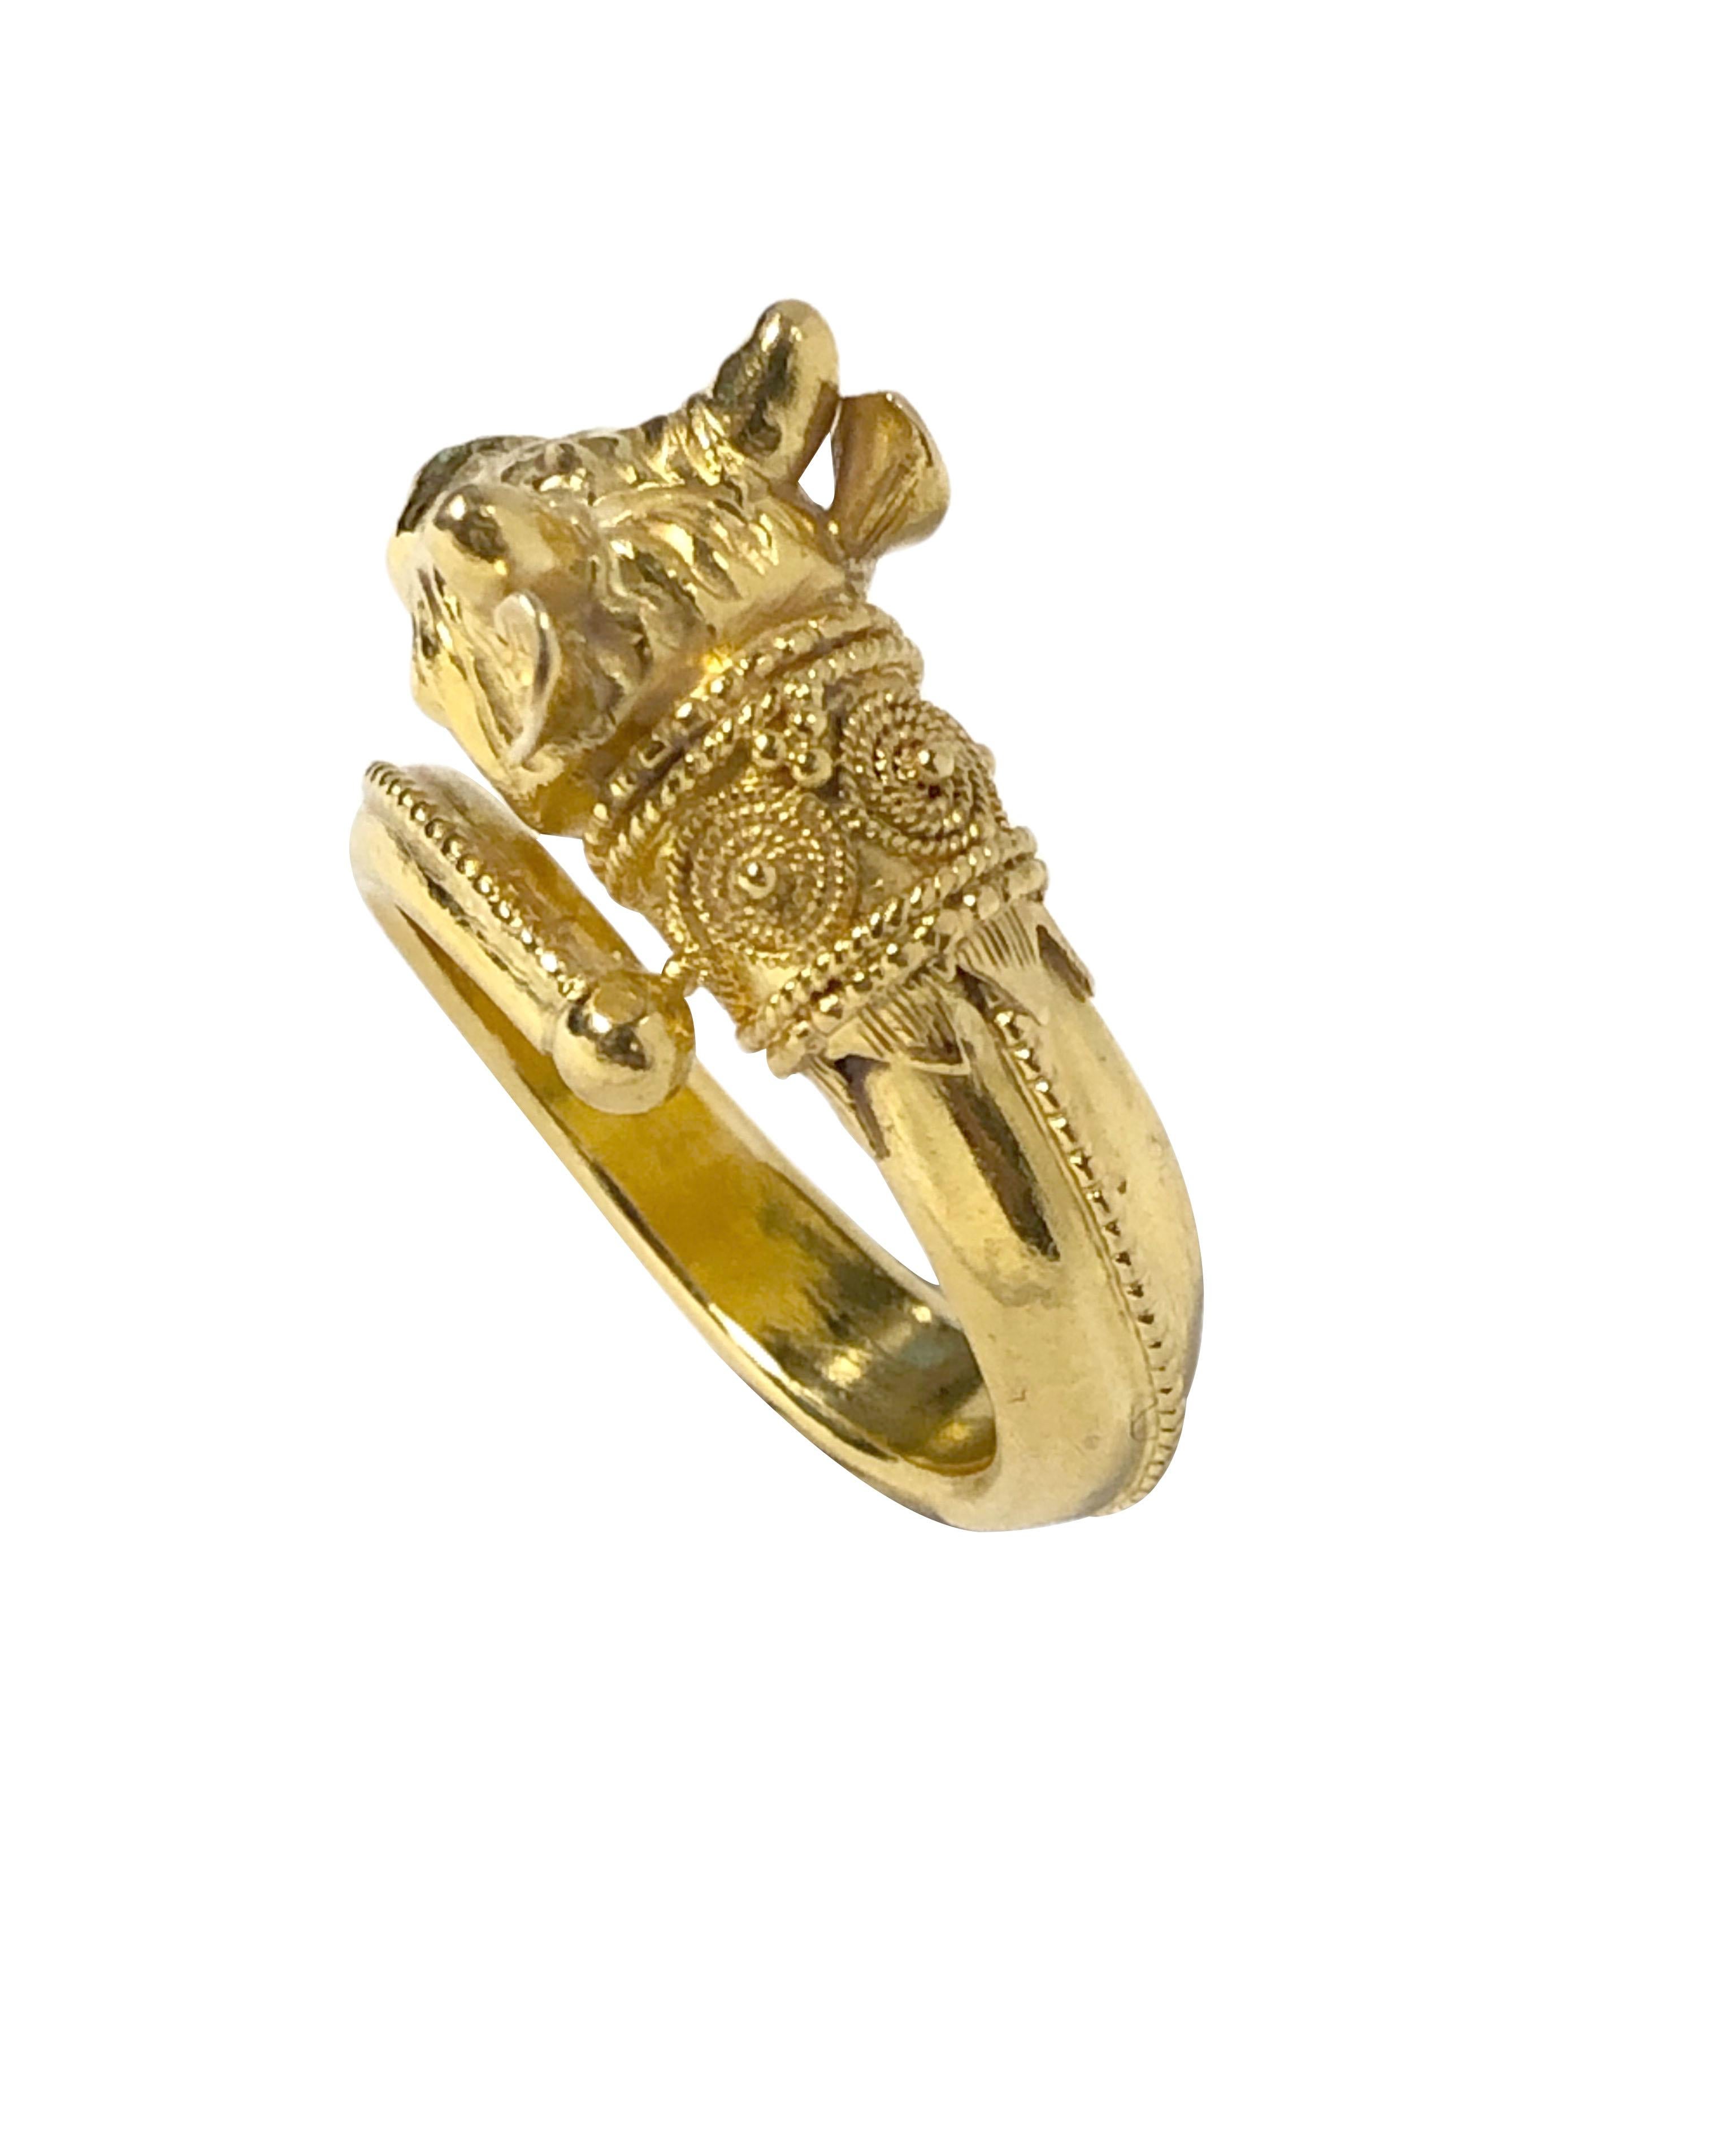 Ilias Lalaounis of Greece 18K Yellow Gold Rams Head Ring in an Ancient Roman style. the top of the ring measures 5/8 X 3/8 inch. Finger size 6. 